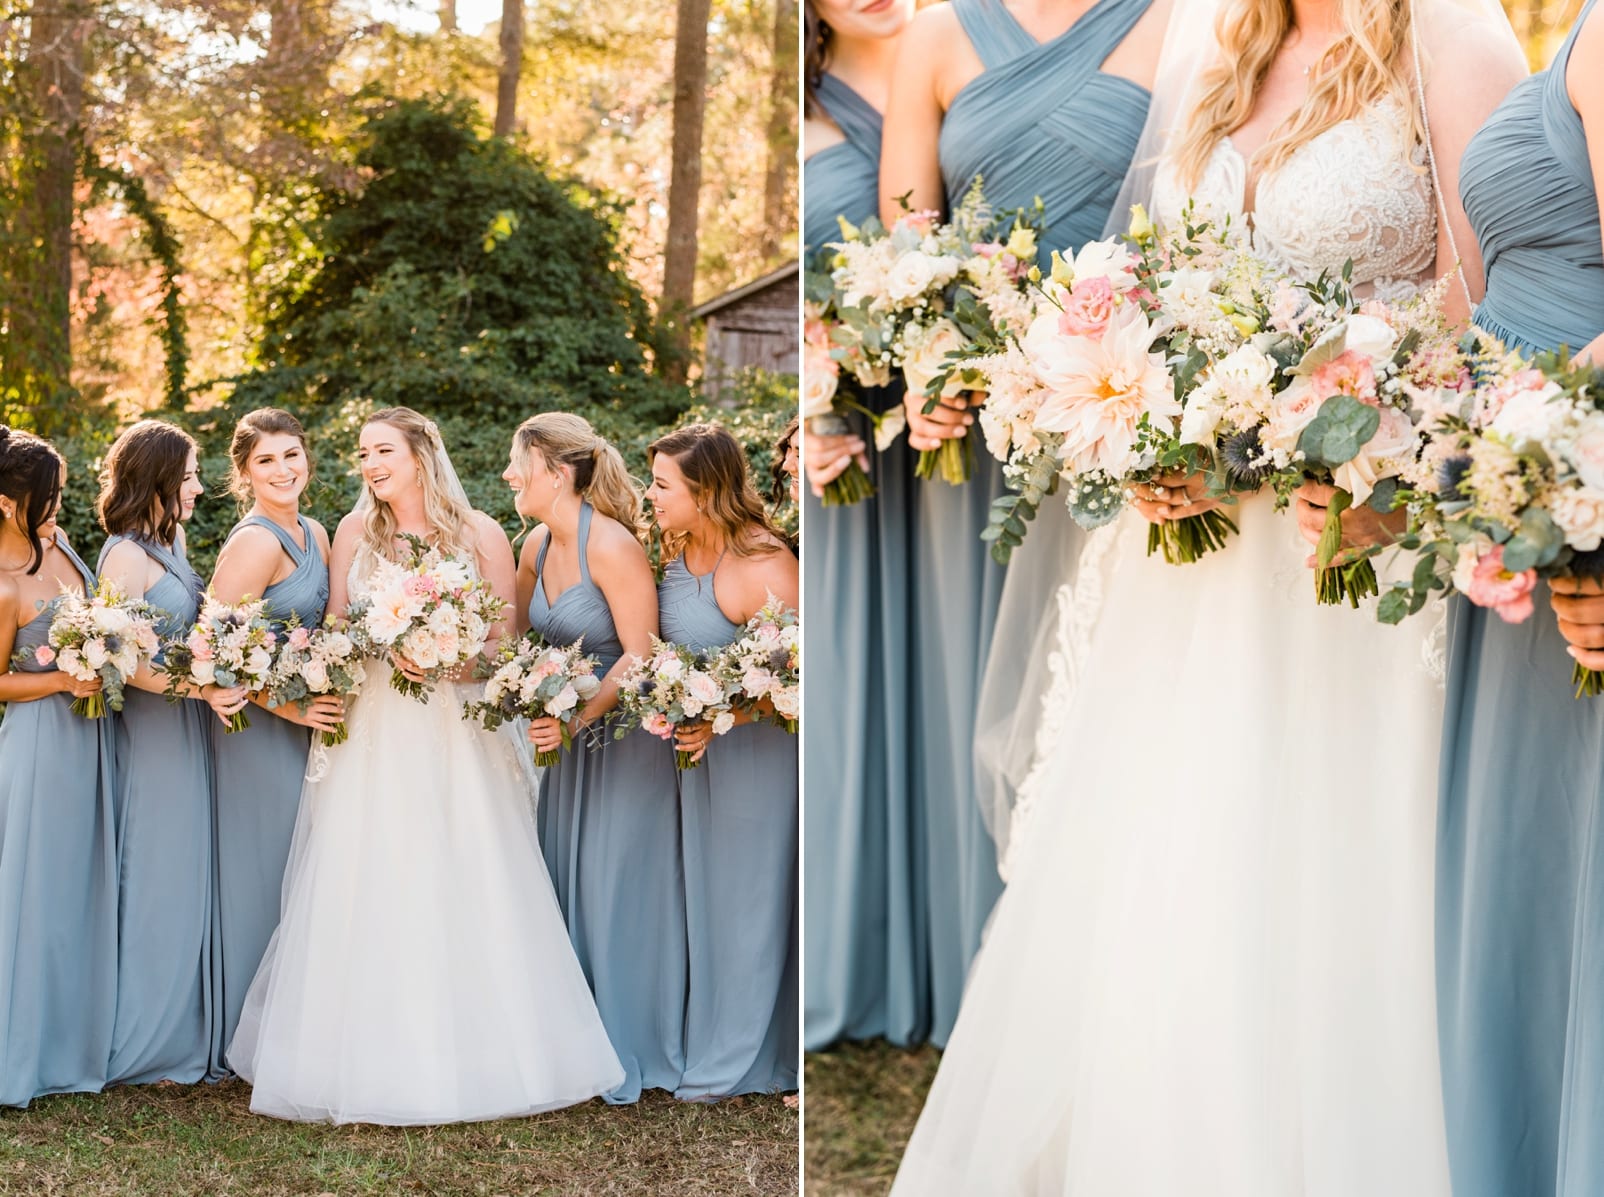 Oaks at Salem bridesmaids with their bouquets standing with the bride photo